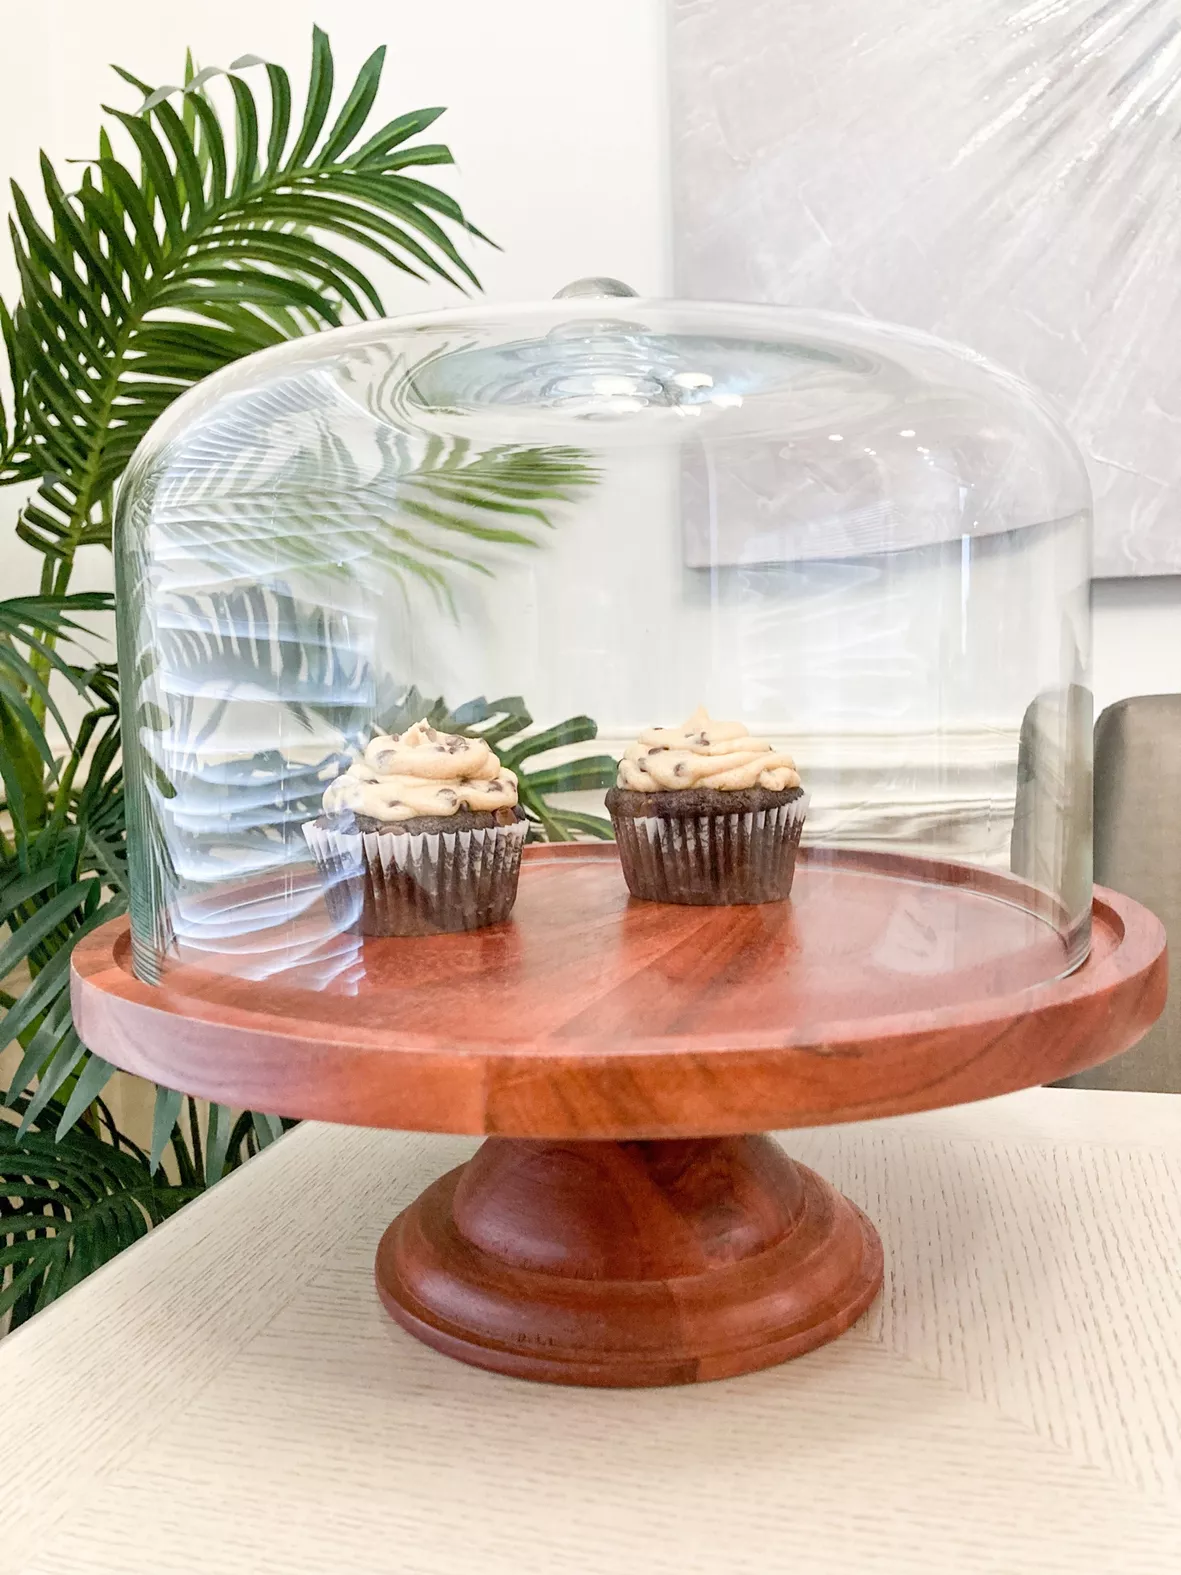 Libbey Acaciawood Footed Round Wood Server Cake Stand with Glass Dome